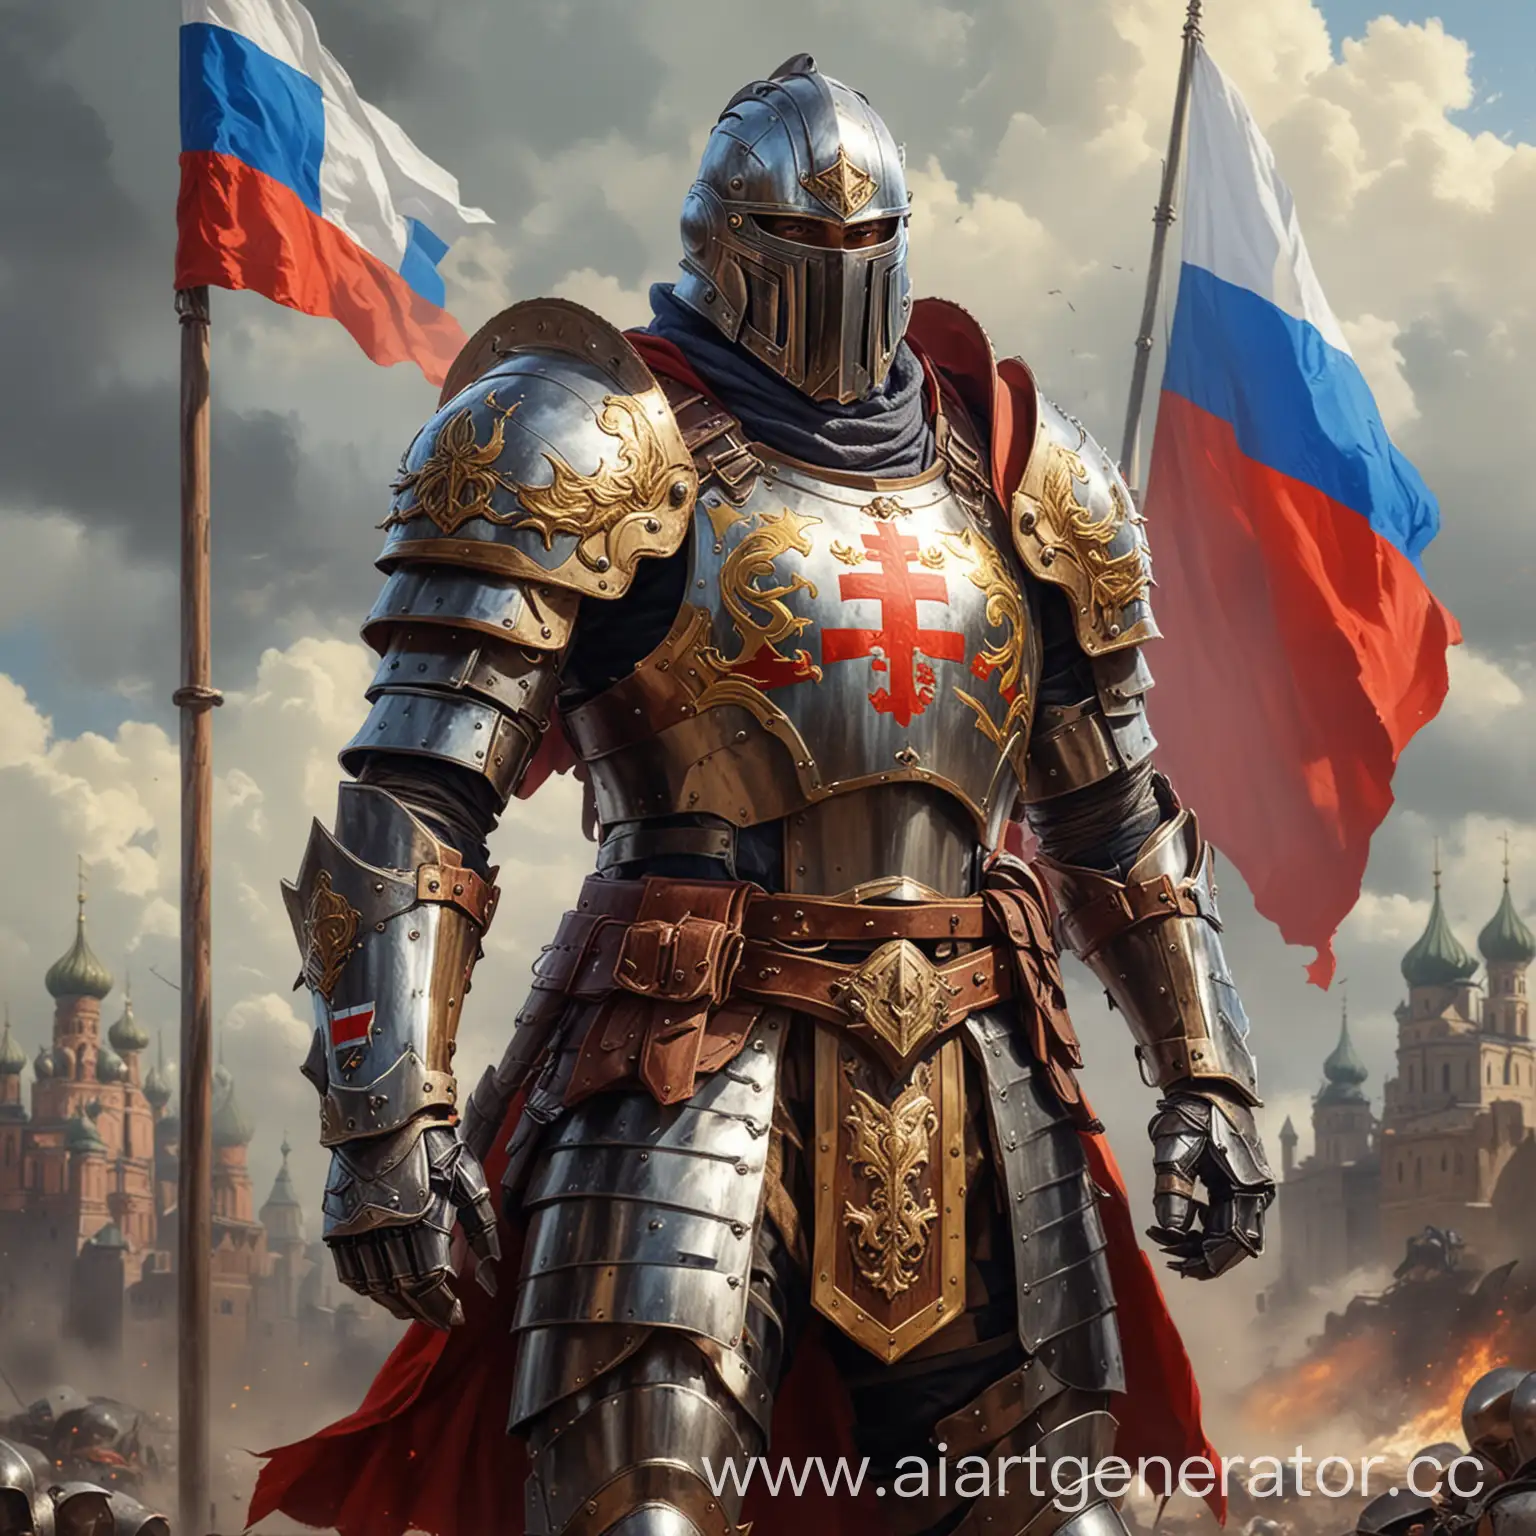 Paladin-in-Armor-Standing-Against-Russian-Tricolor